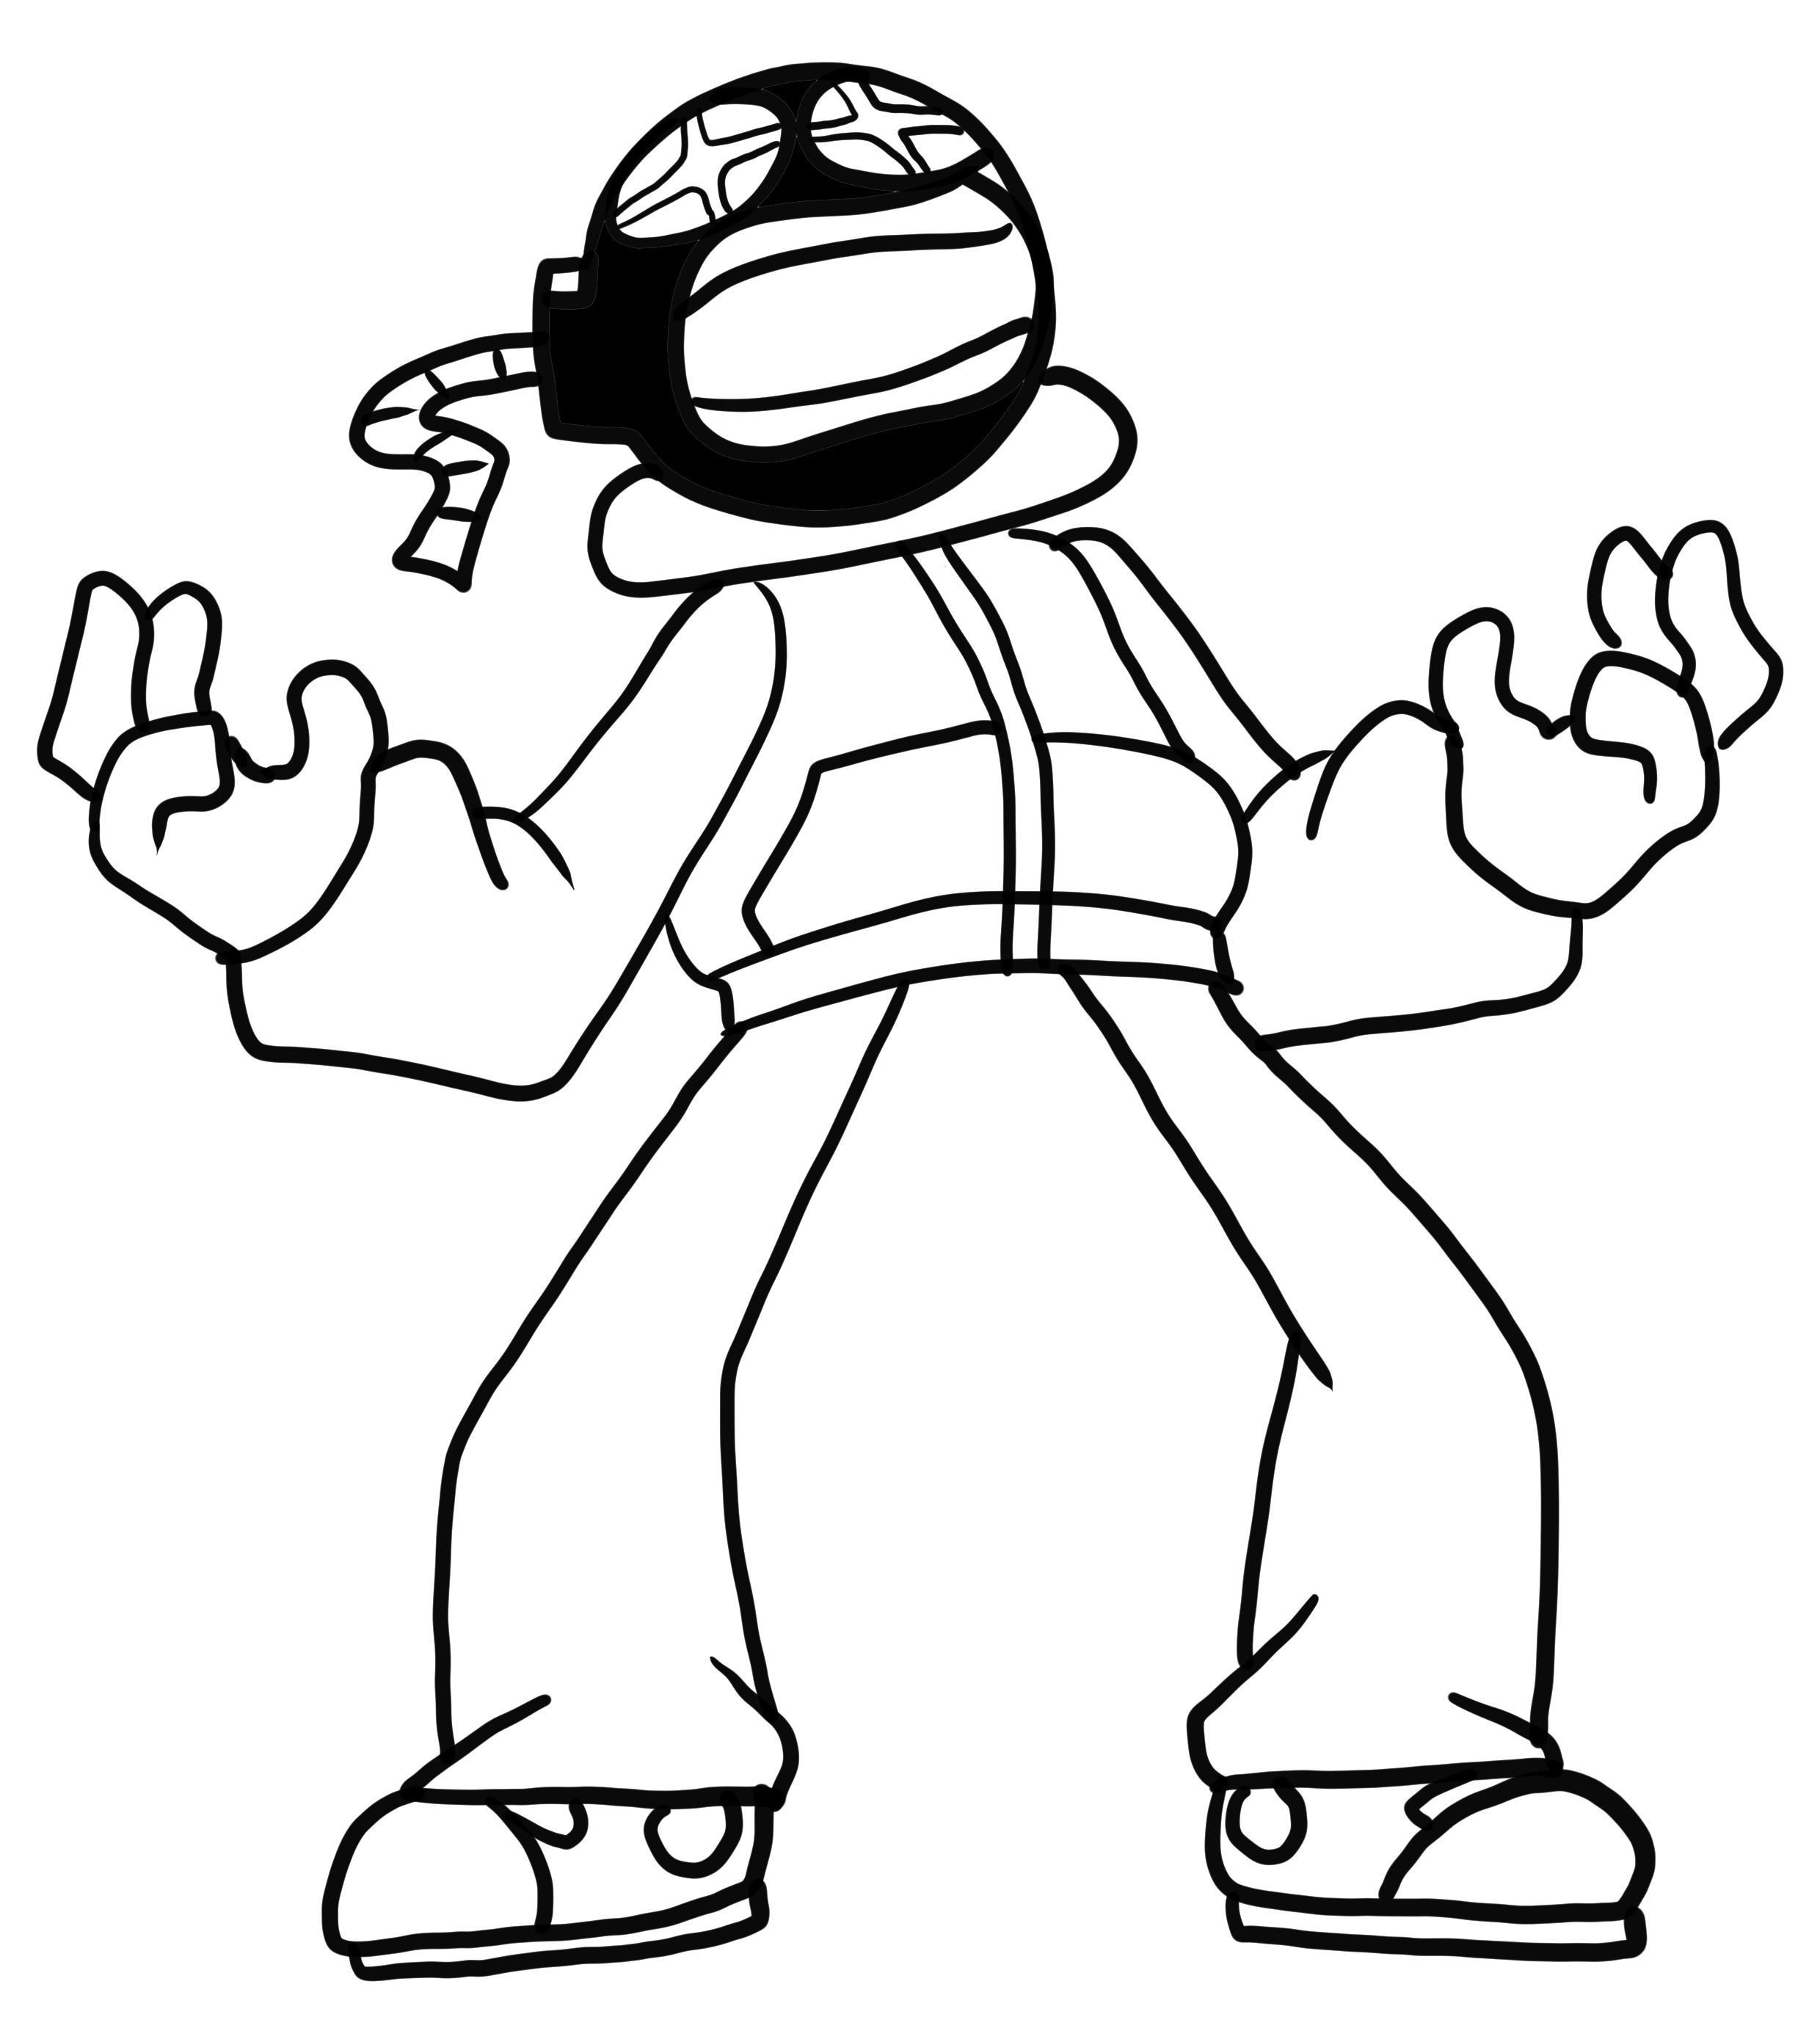 Whitty from Friday Night Funkin coloring page to print and coloring